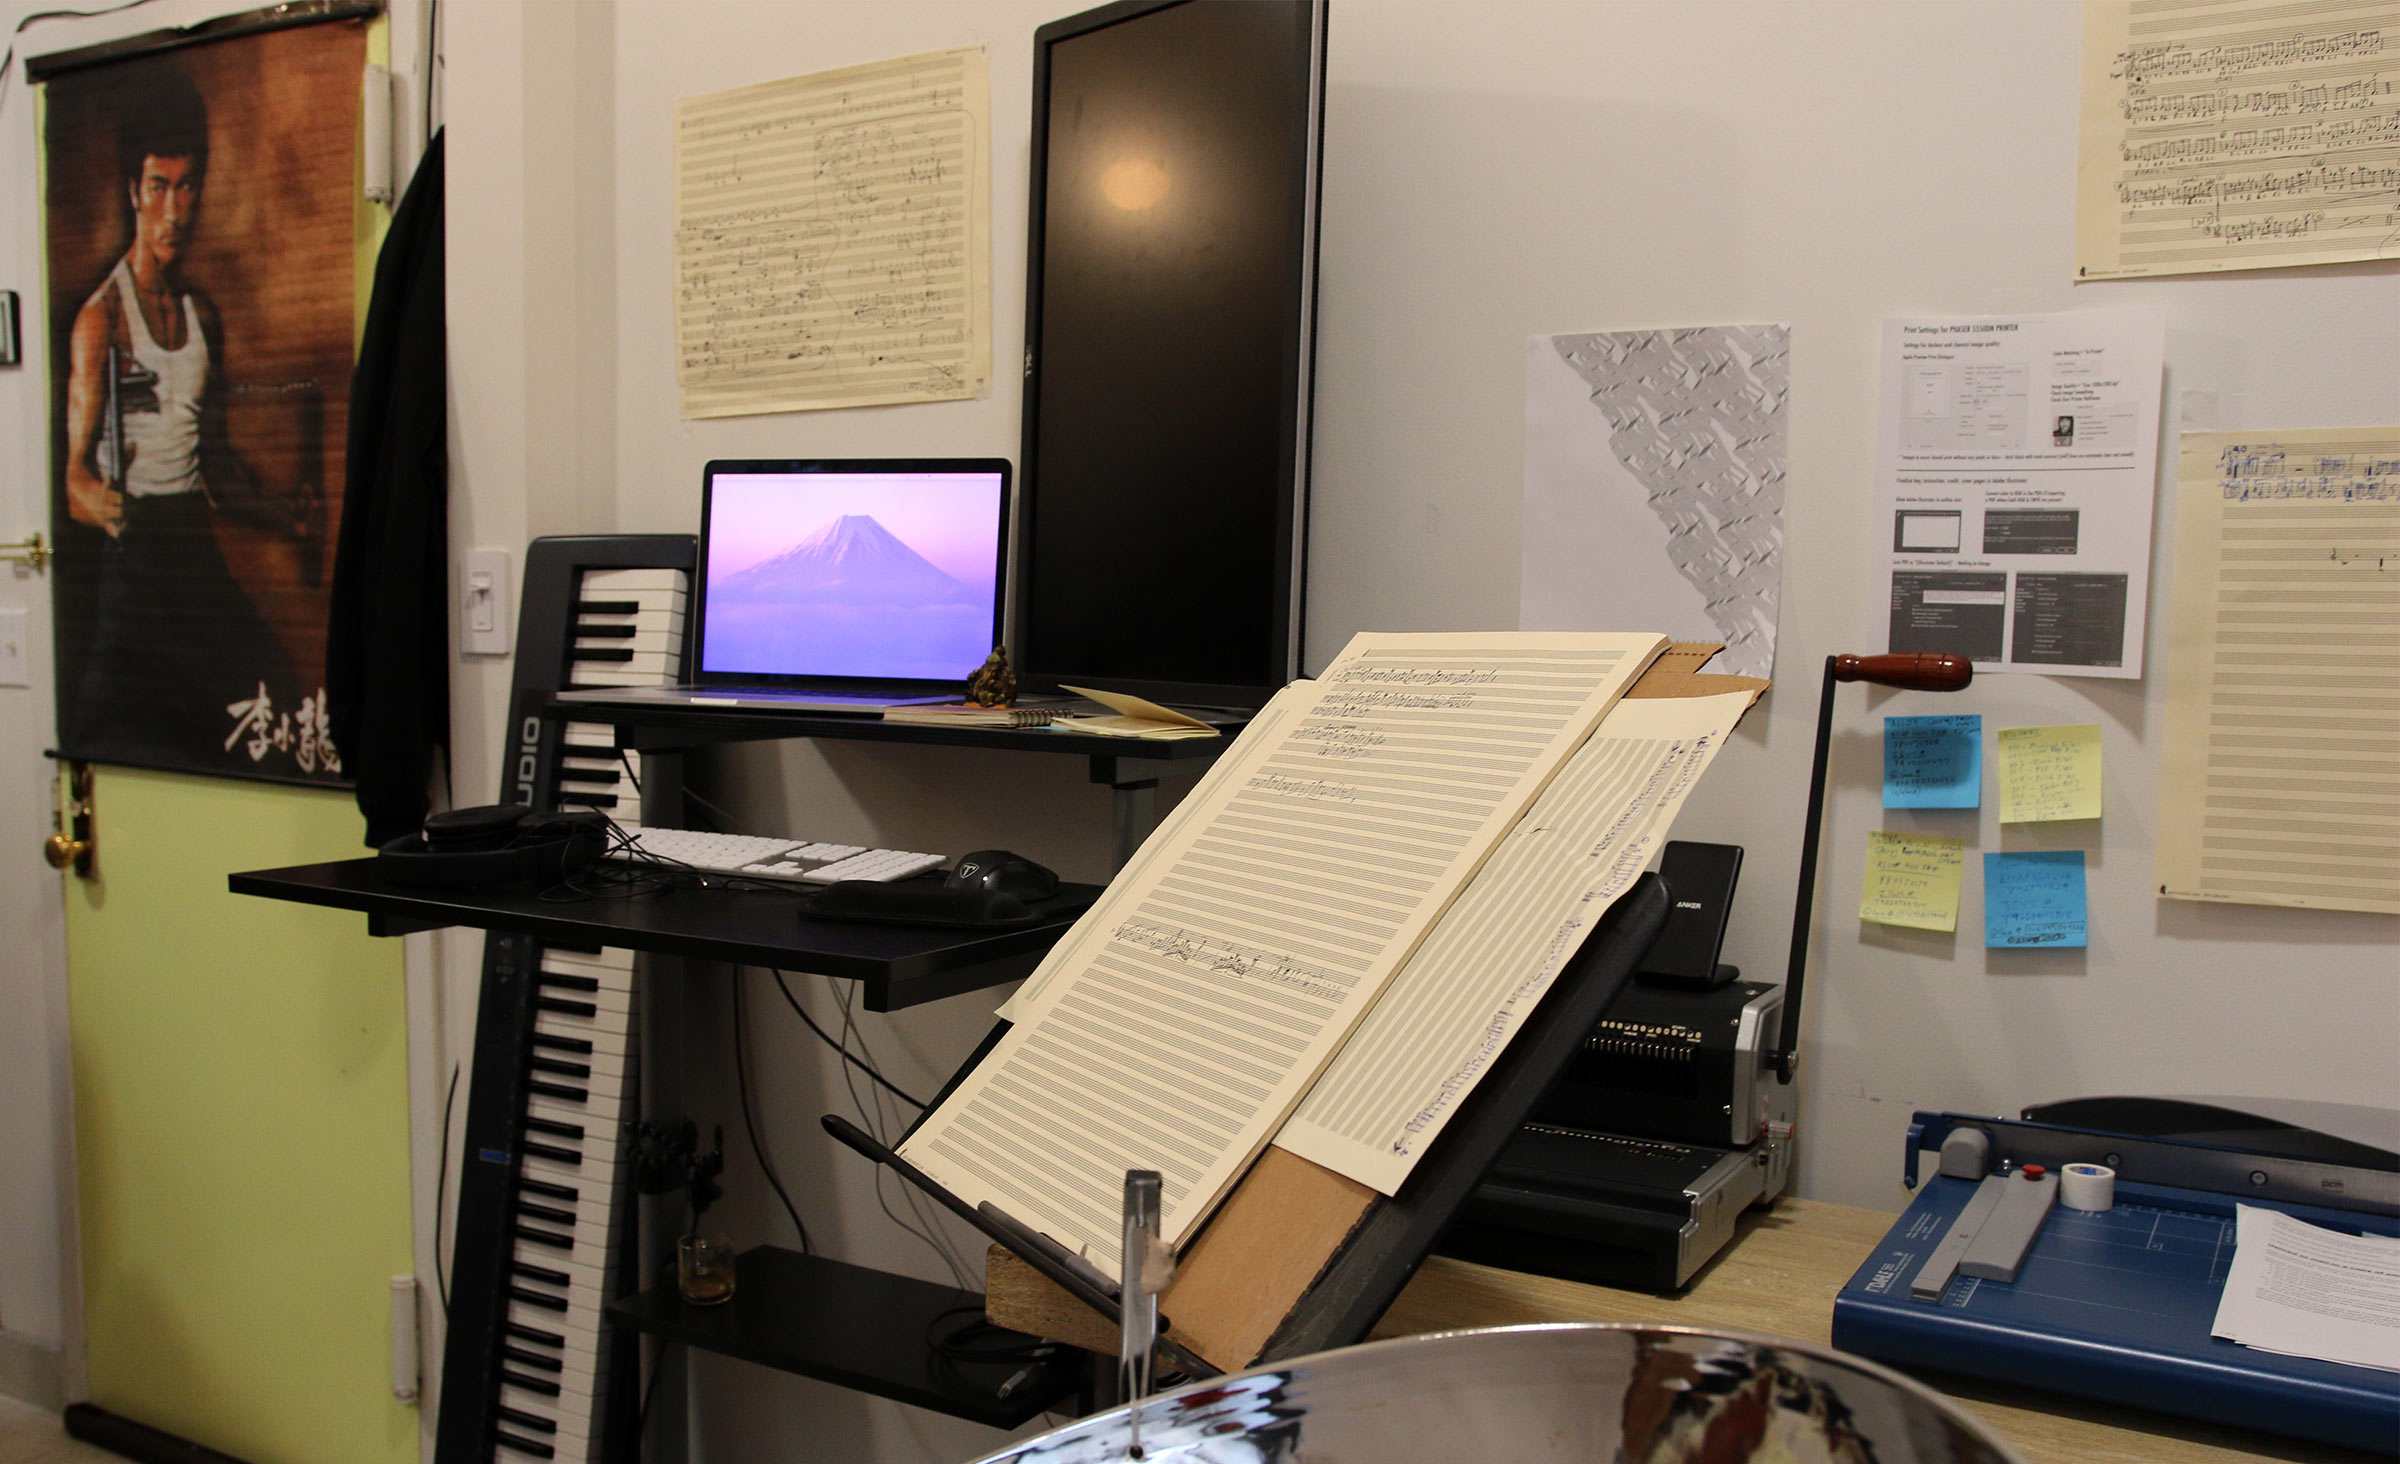 A view of the "office" part of Andy Akiho's apartment which includes a posted of Bruce Lee, a MIDI keyboard on its side, a computer terminal, some music stands, and handwritten scores.